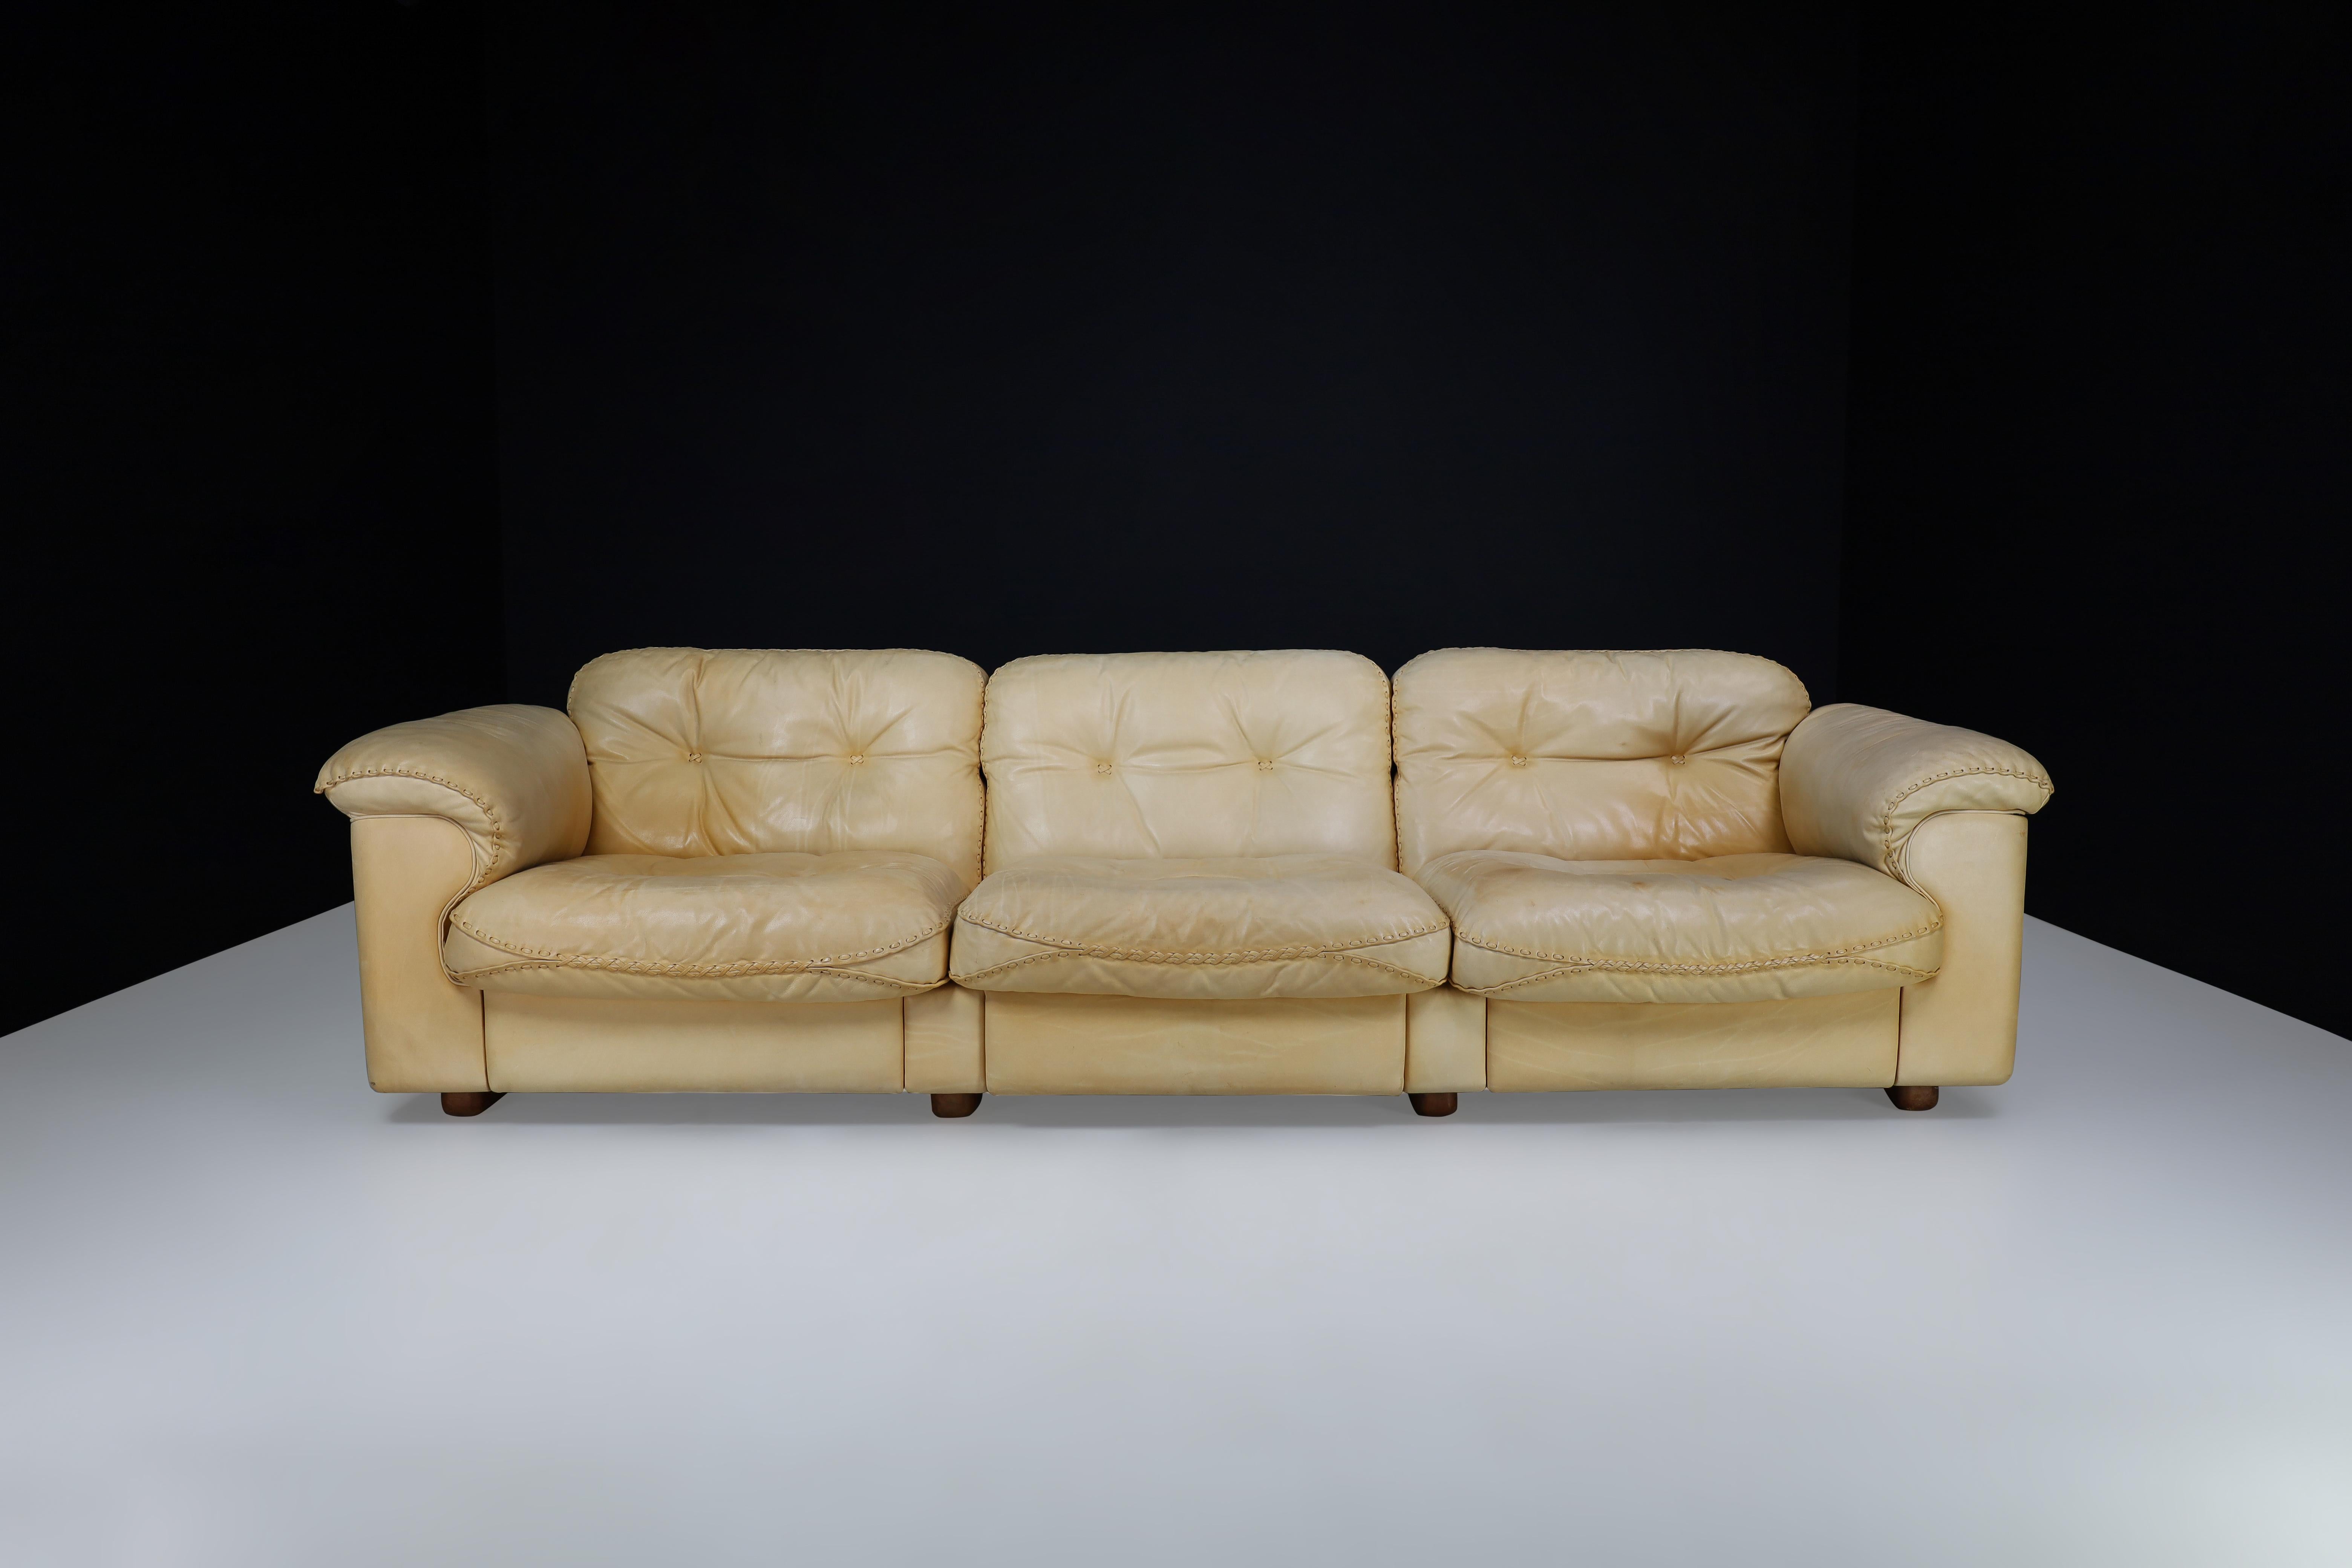 De Sede DS-101 Leather Three-seater sofa, Switzerland 1960s,

This exceptional Leather De Sede DS-101 three-seater sofa, originating from Switzerland in the 1960s, showcases outstanding craftsmanship. With its extendable seat, it offers